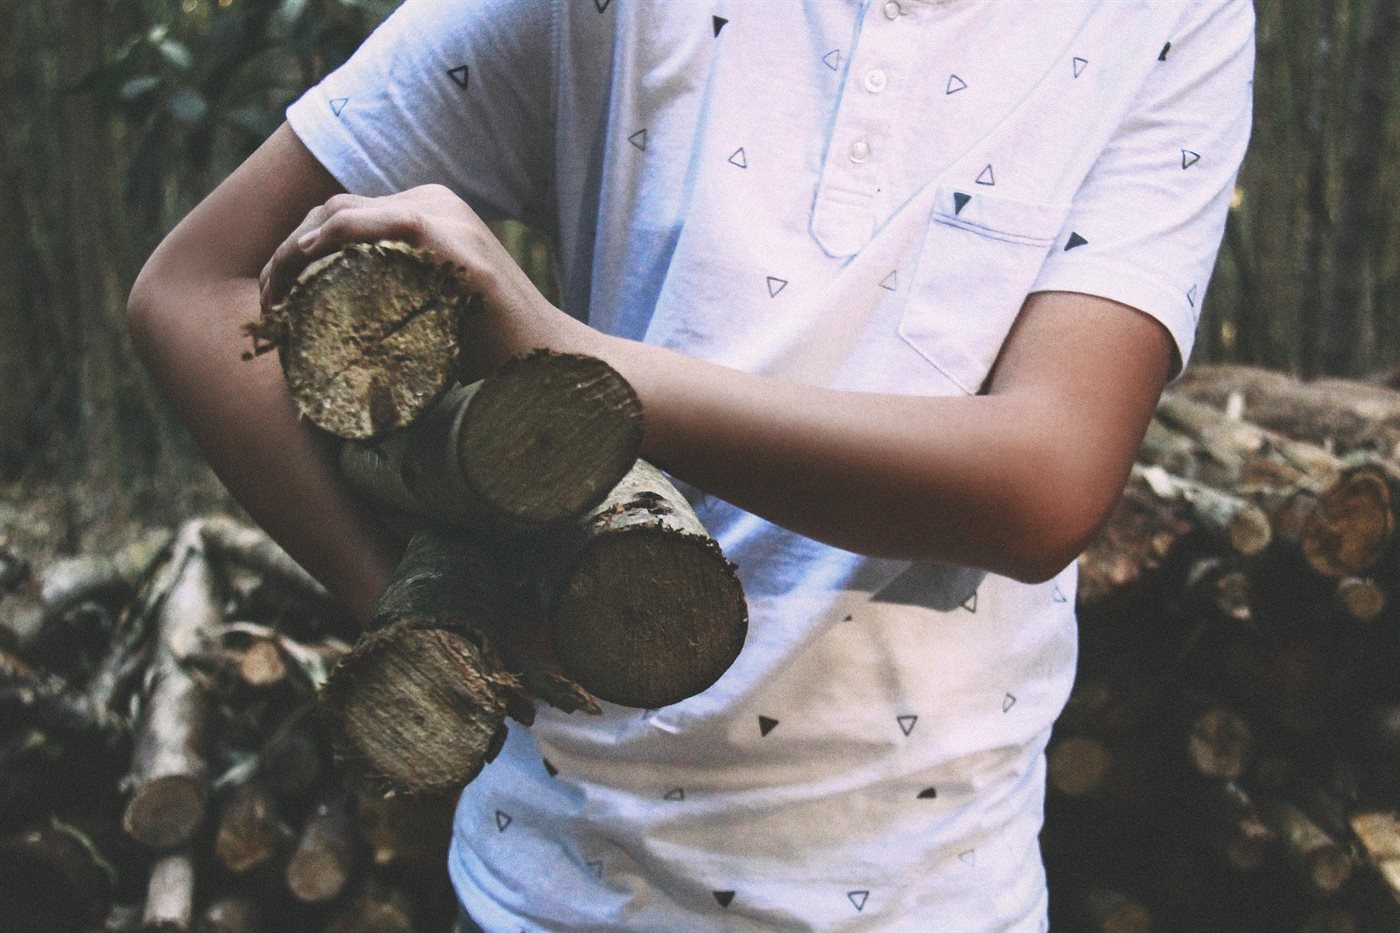 Carrying firewood